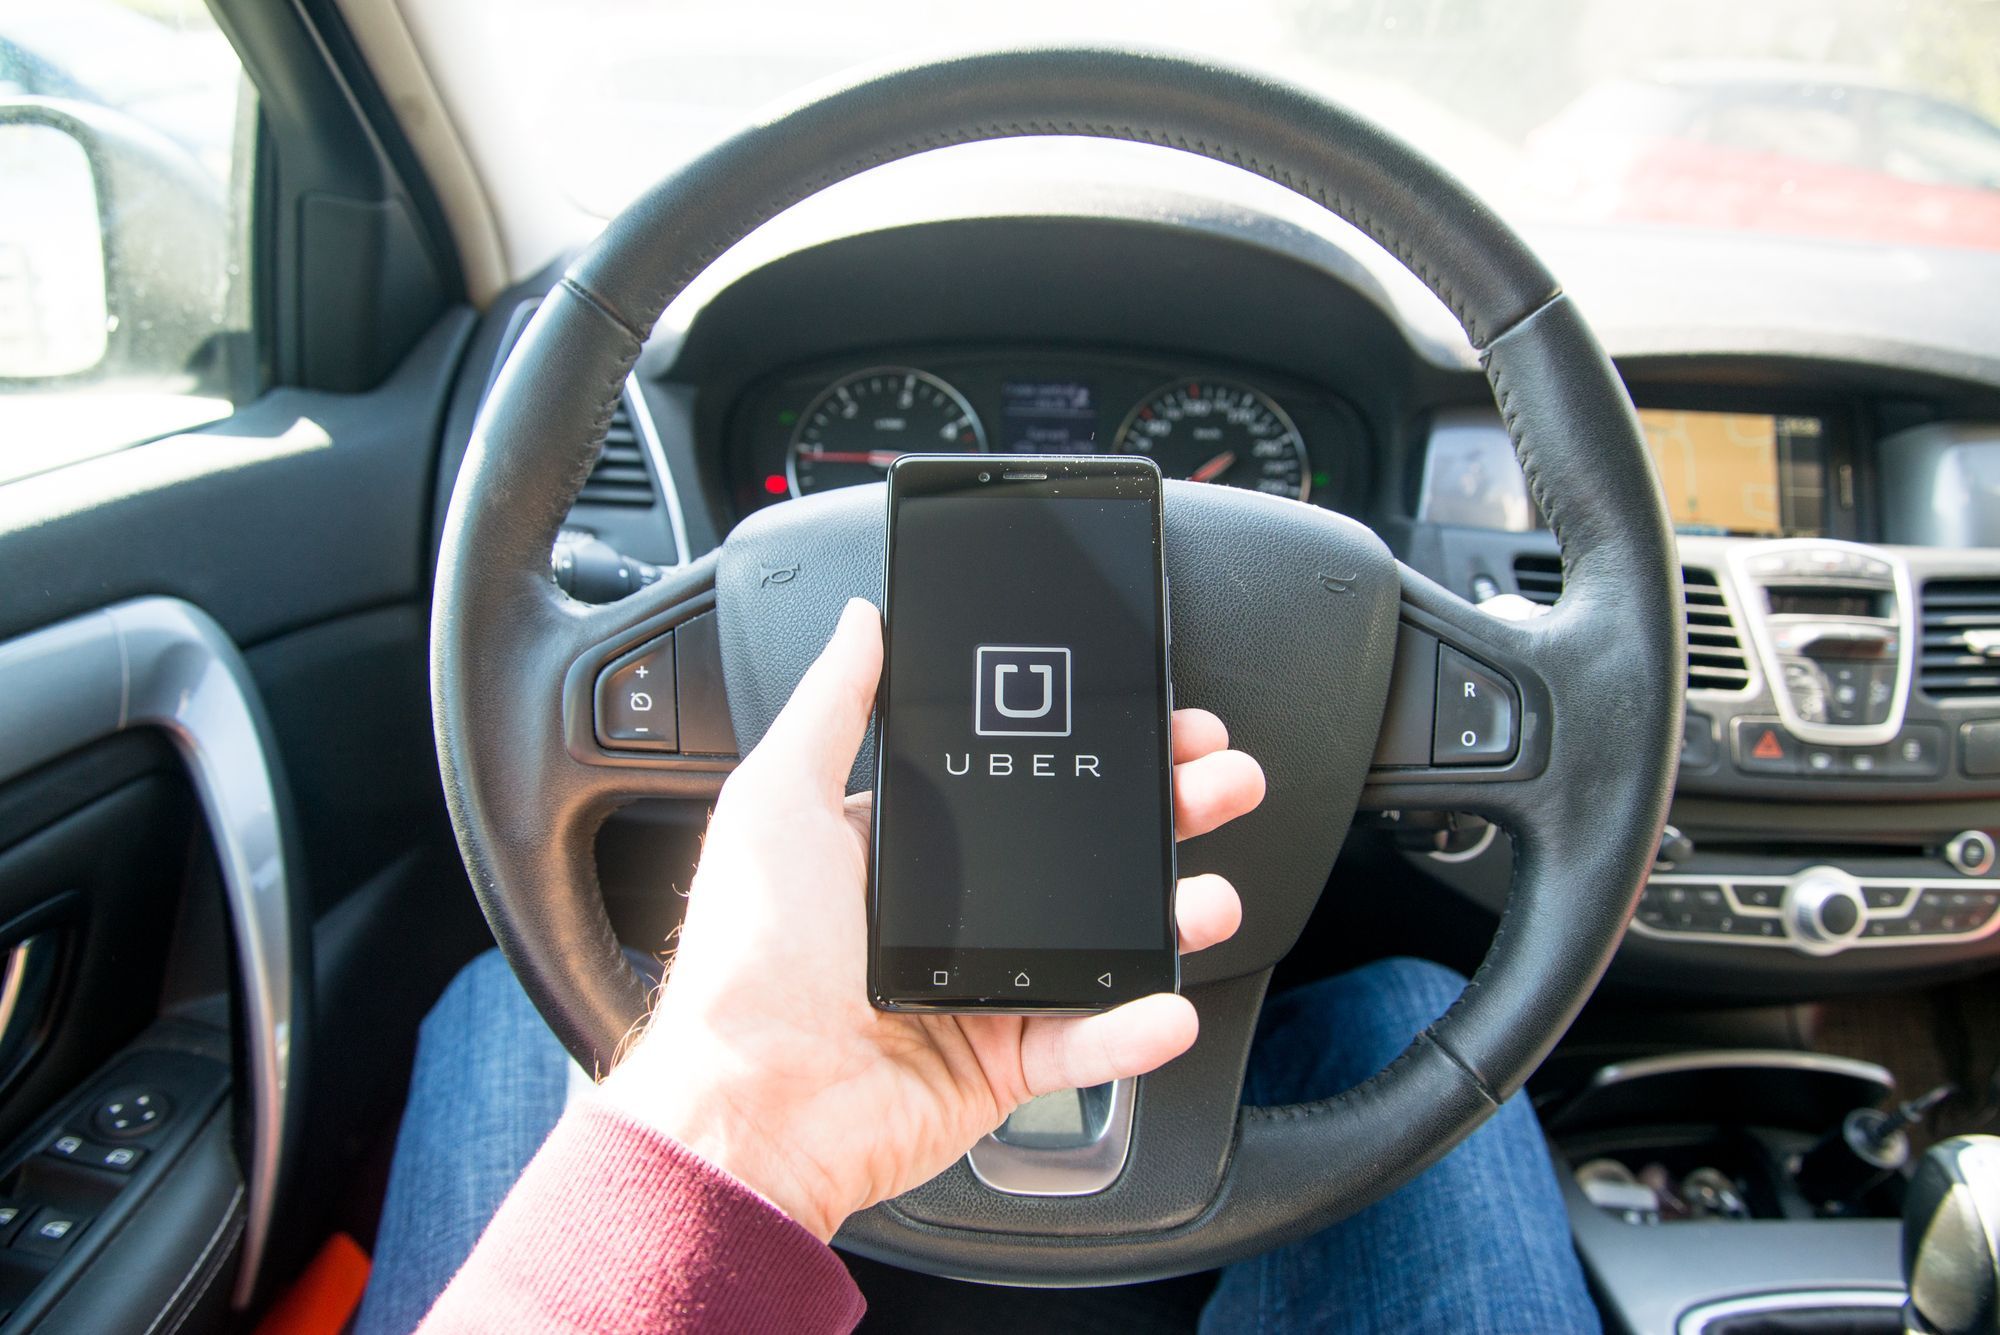 Uber app on a drivers smartphone regarding the new contract Uber has drivers signing